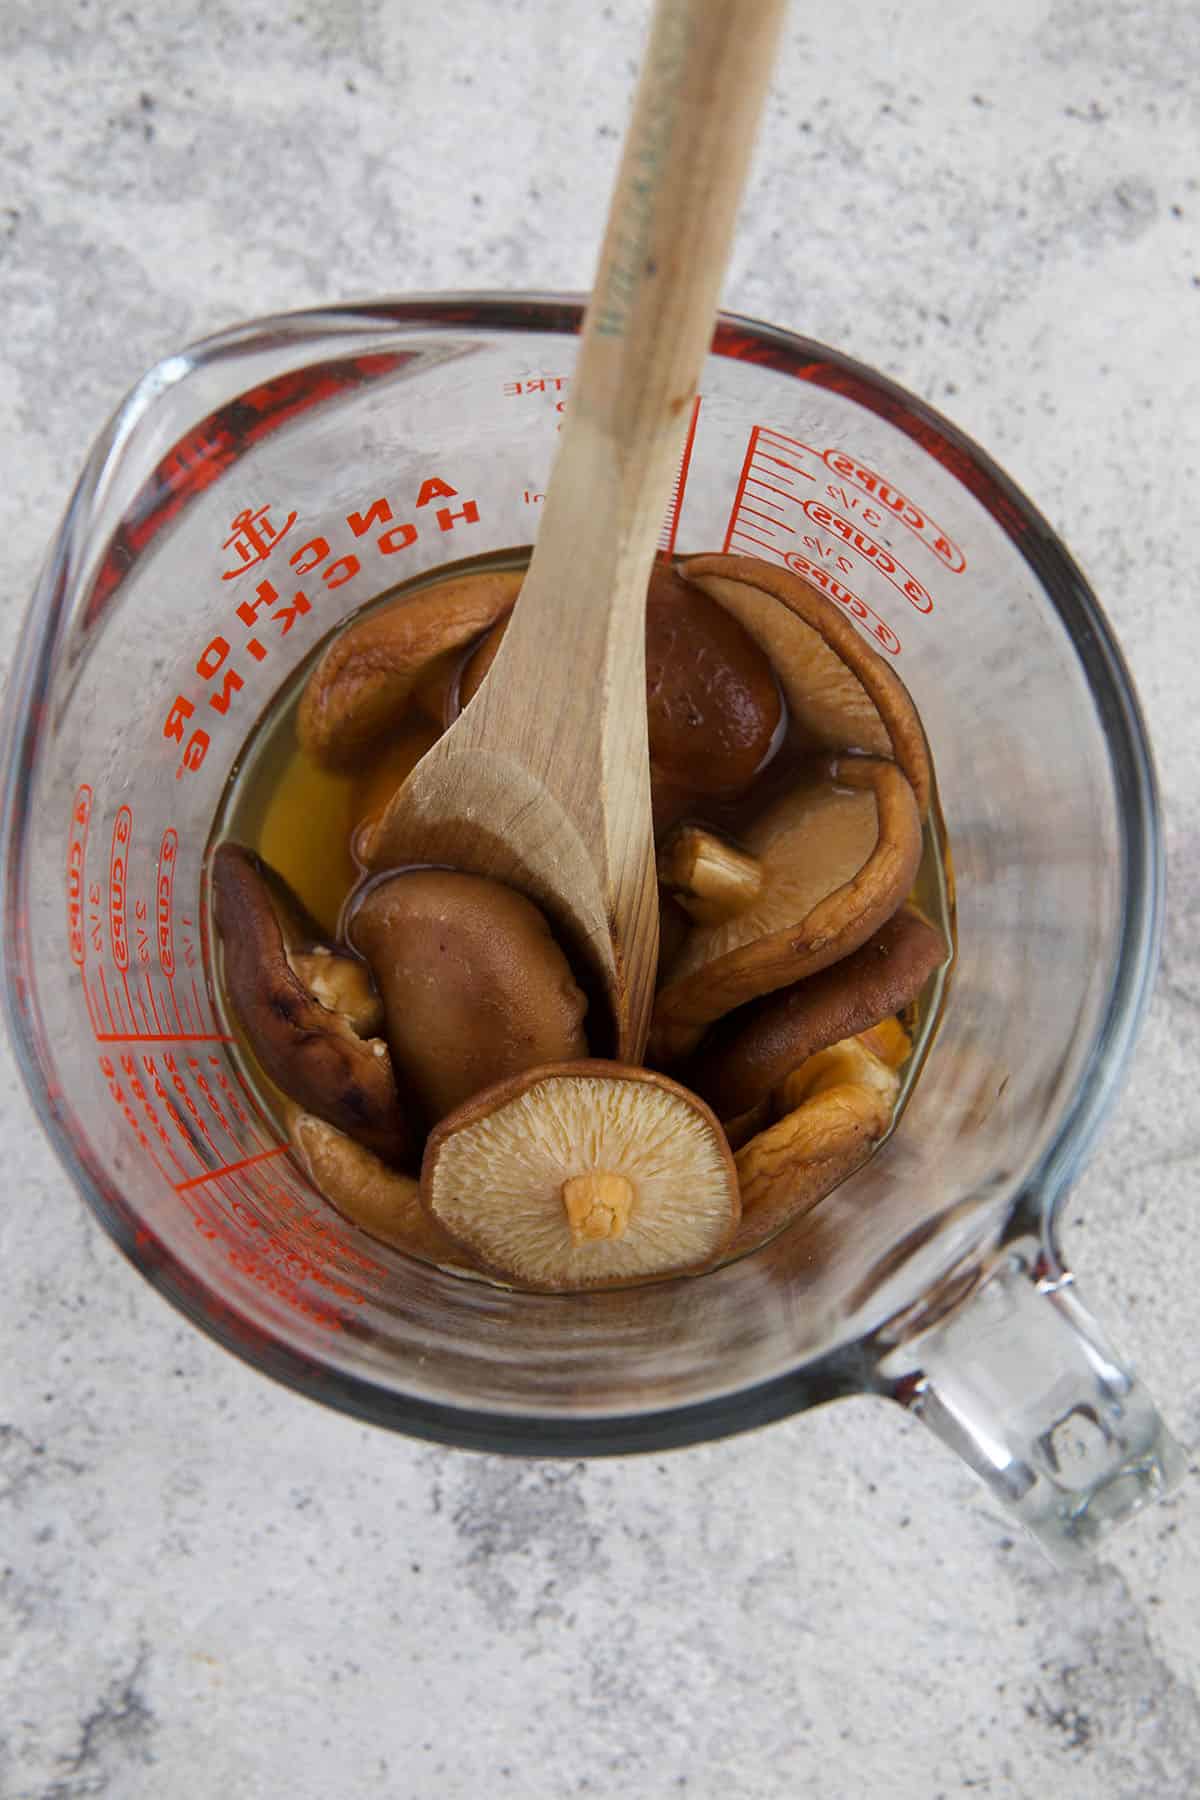 Dried mushrooms are soaking in water. 